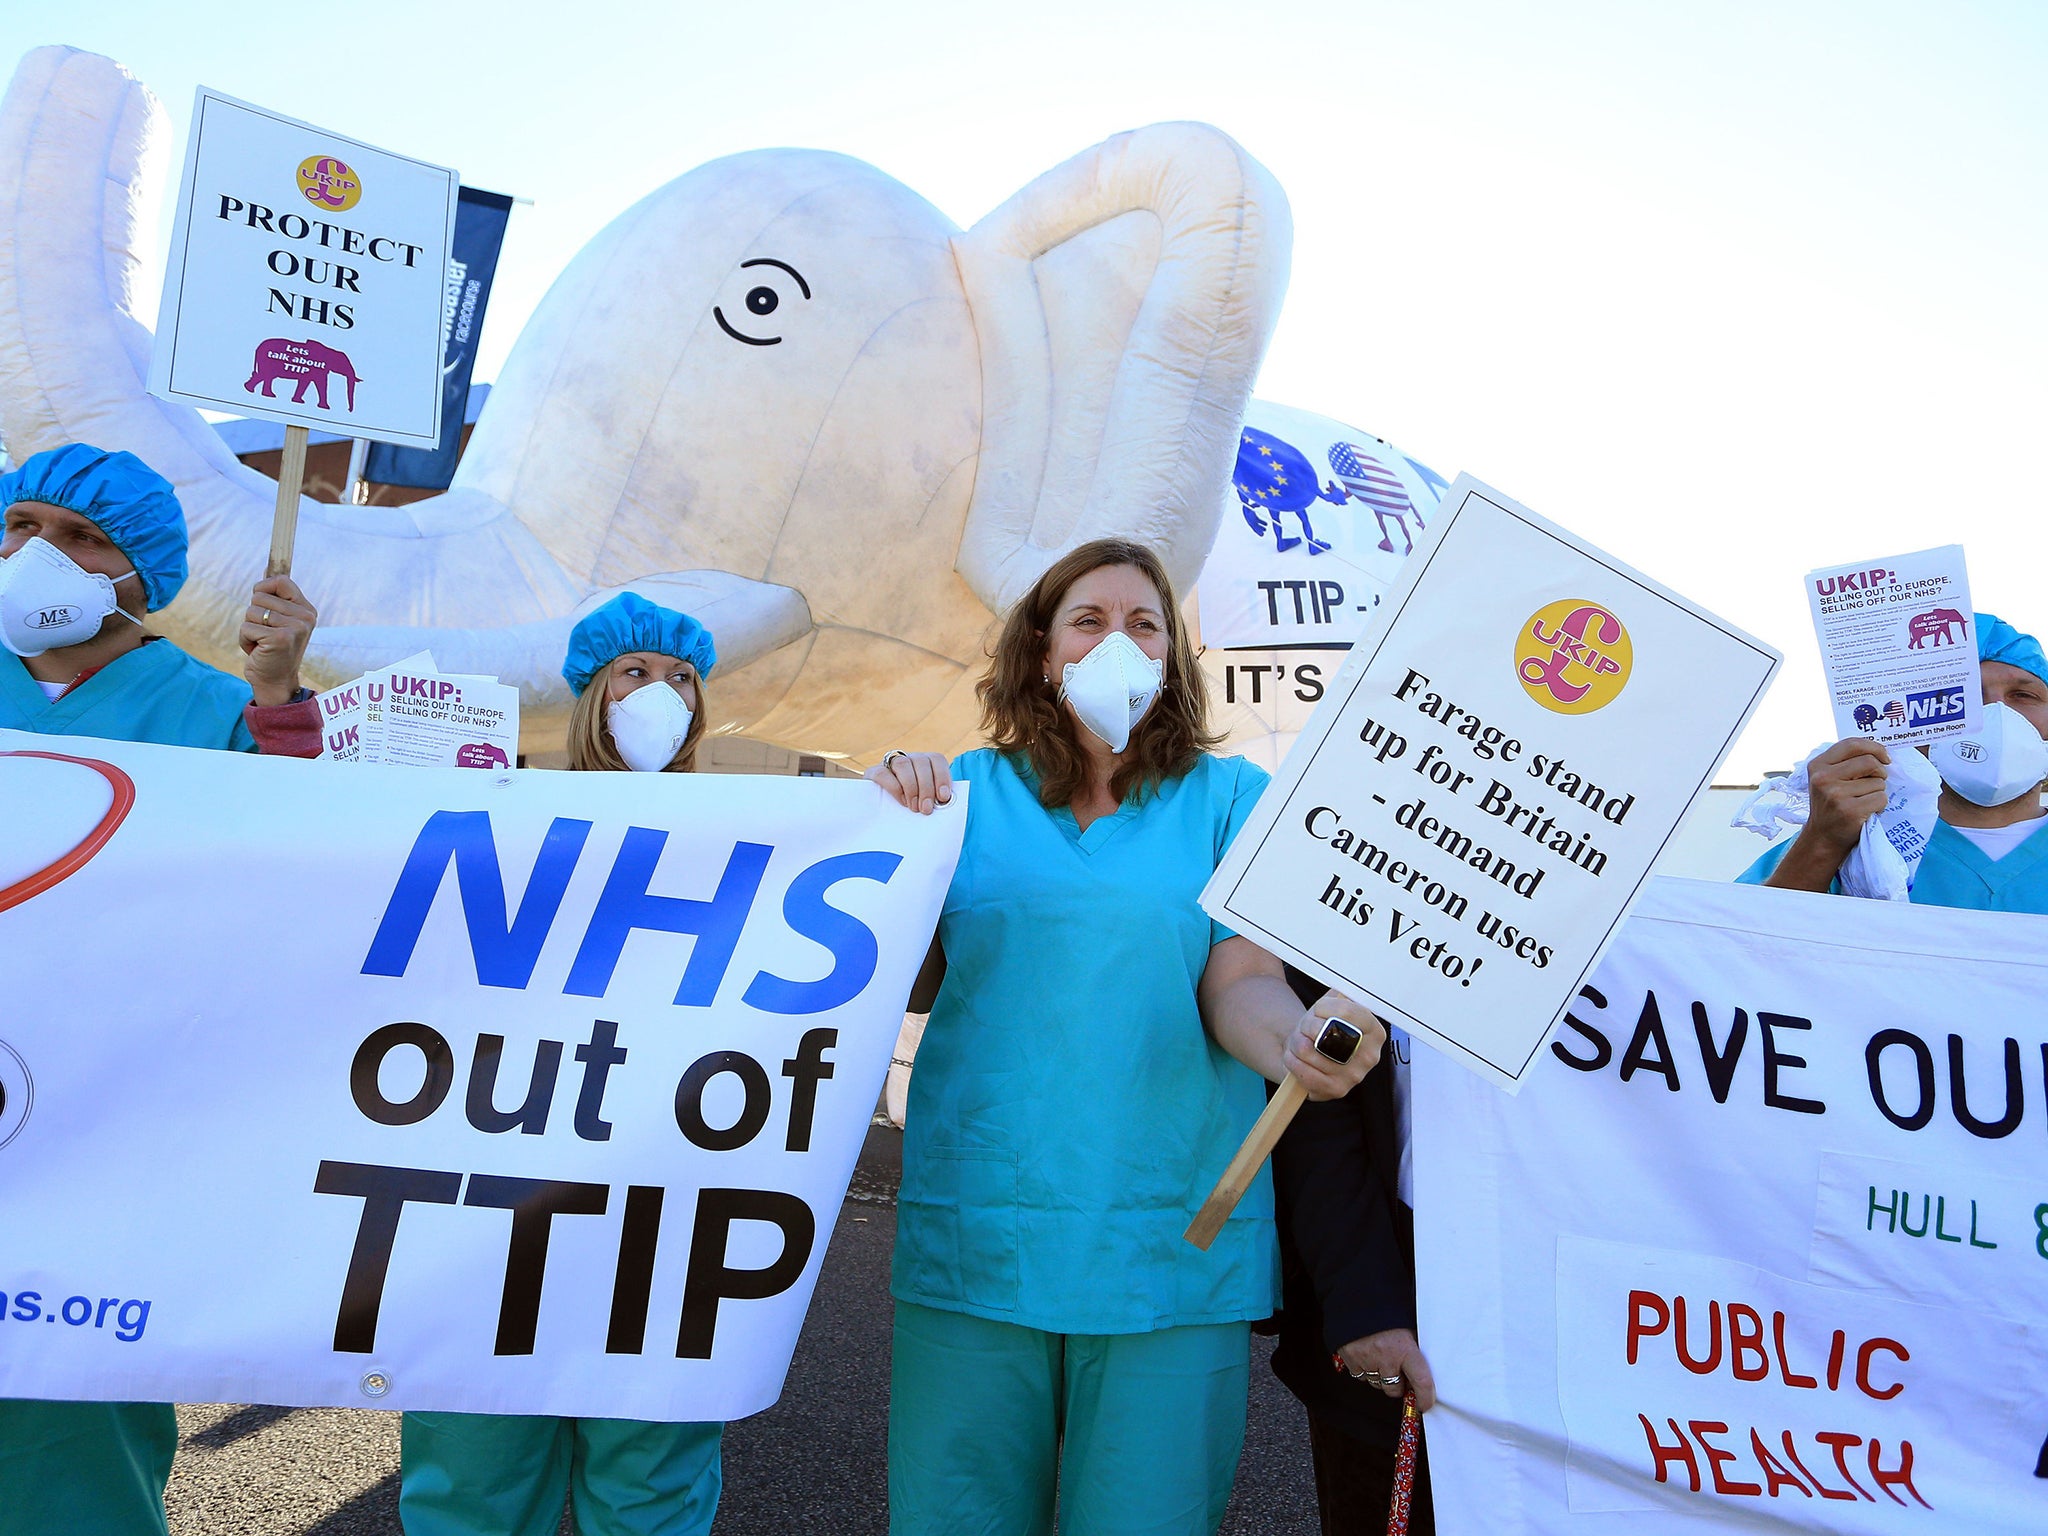 Health campaigners protest about the party's silence over the Transatlantic Trade and Investment Partnership (TTIP)